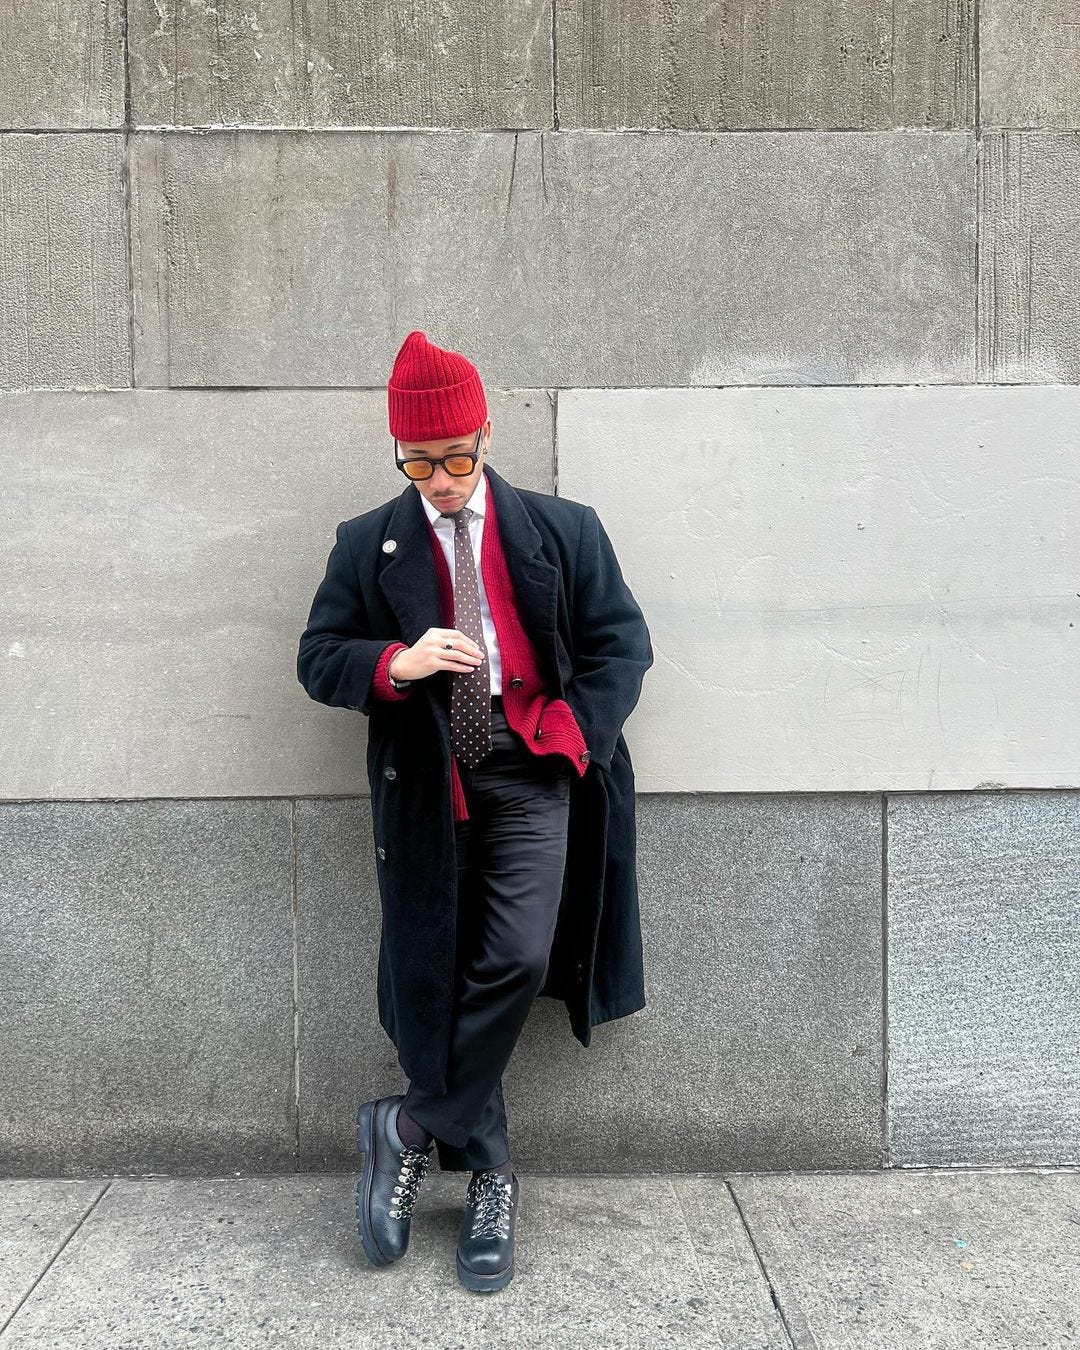 instagram men's style influencer paris.haven wearing a red cardigan